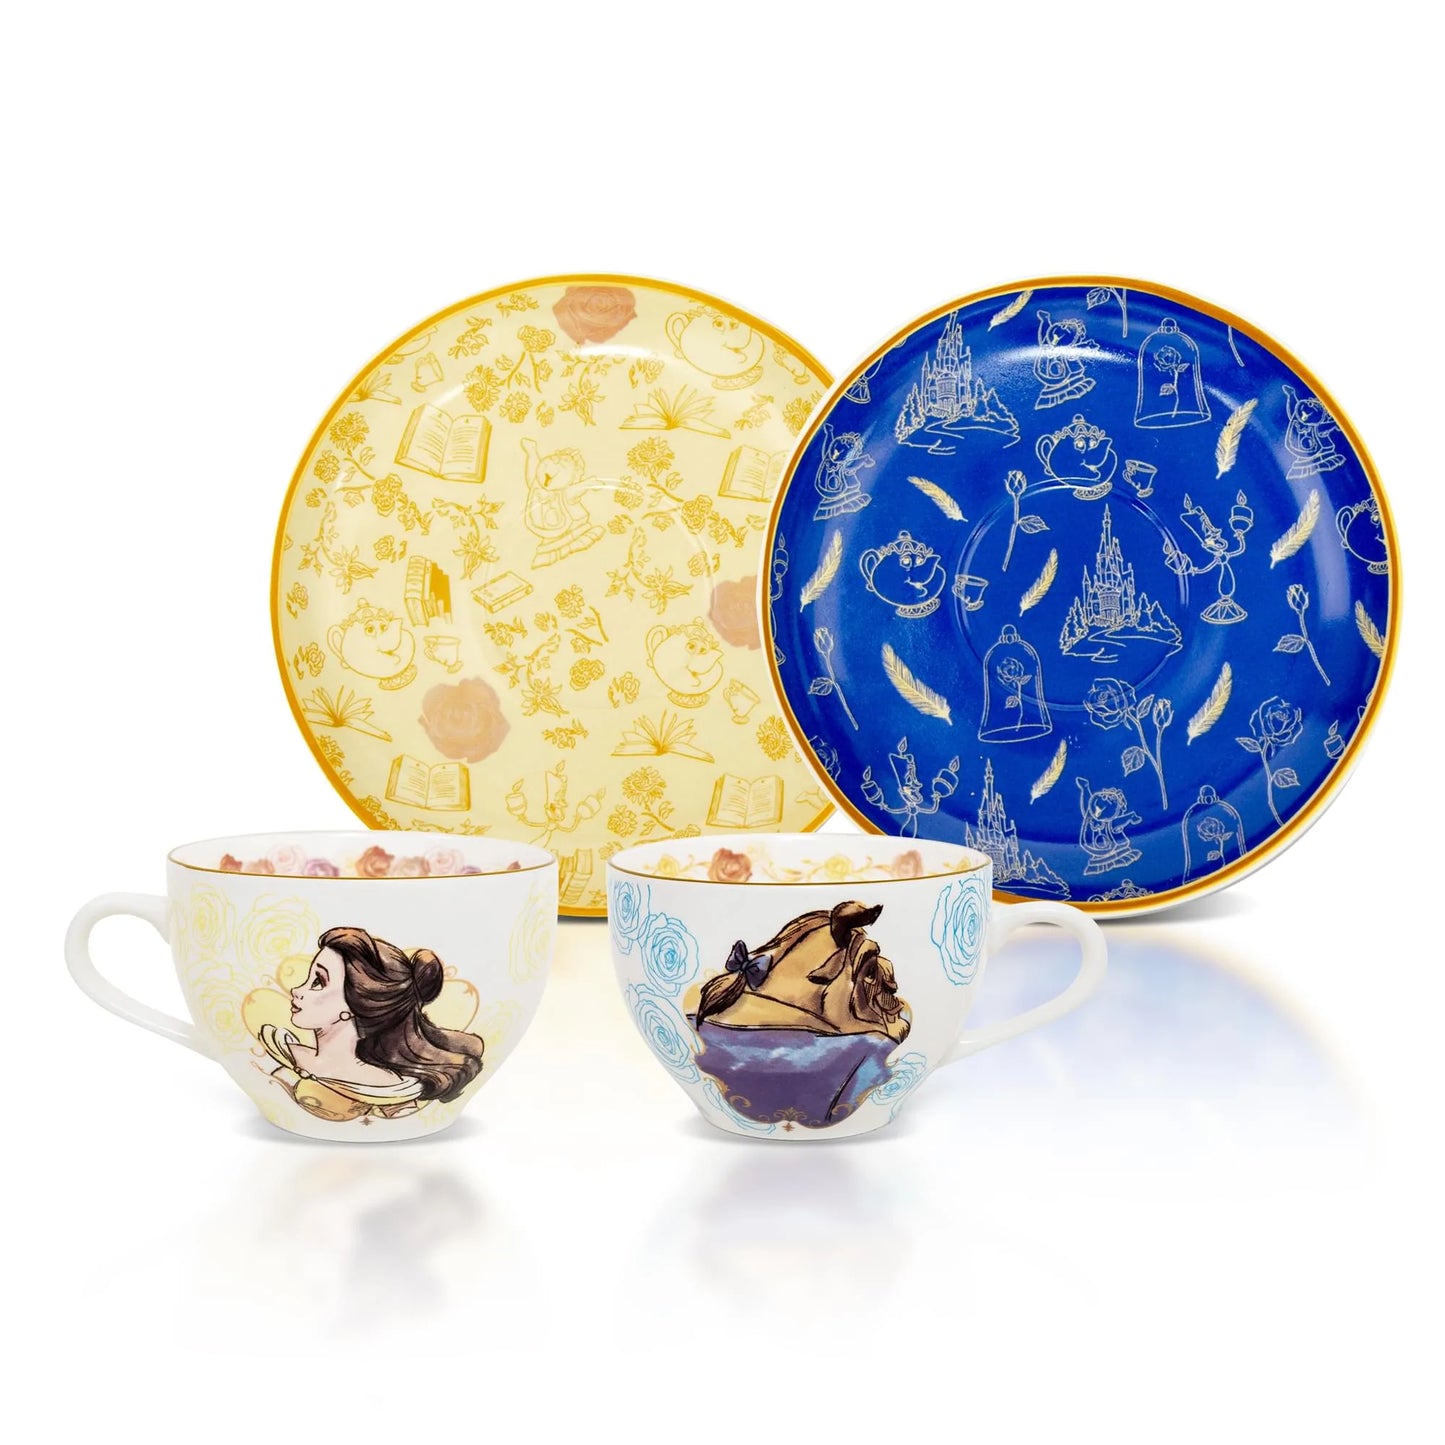 BEAUTY AND THE BEAST 2PC CHINA TEA CUP AND SAUCER SET